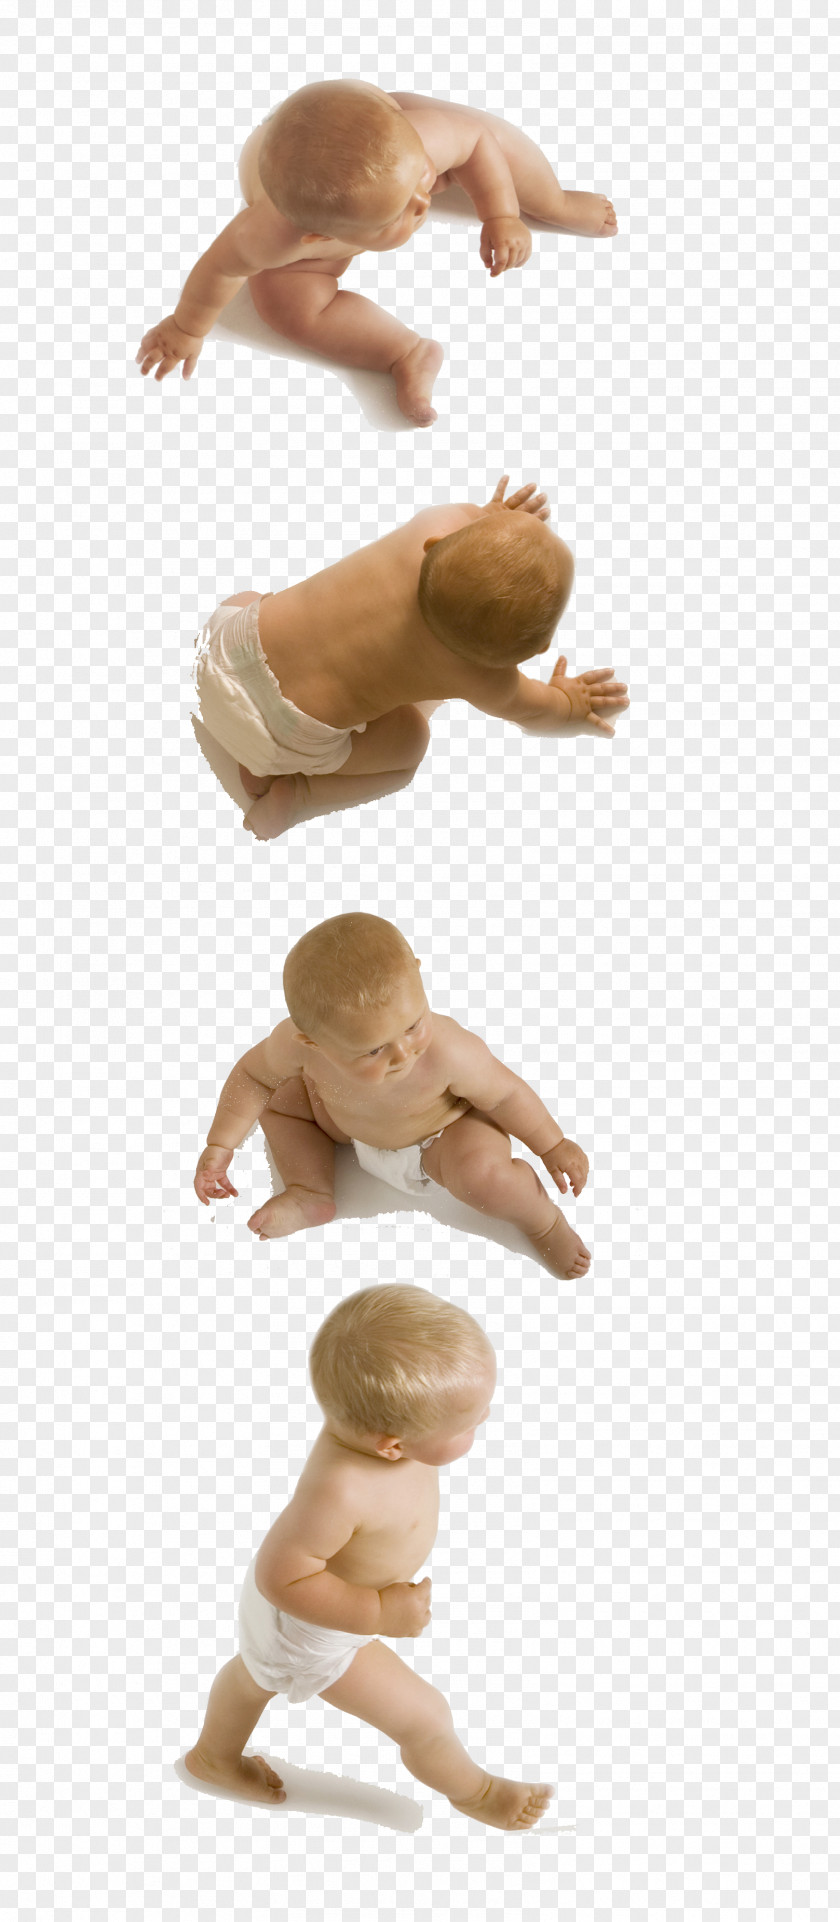 Baby Sign Language Infant Arm Child PNG